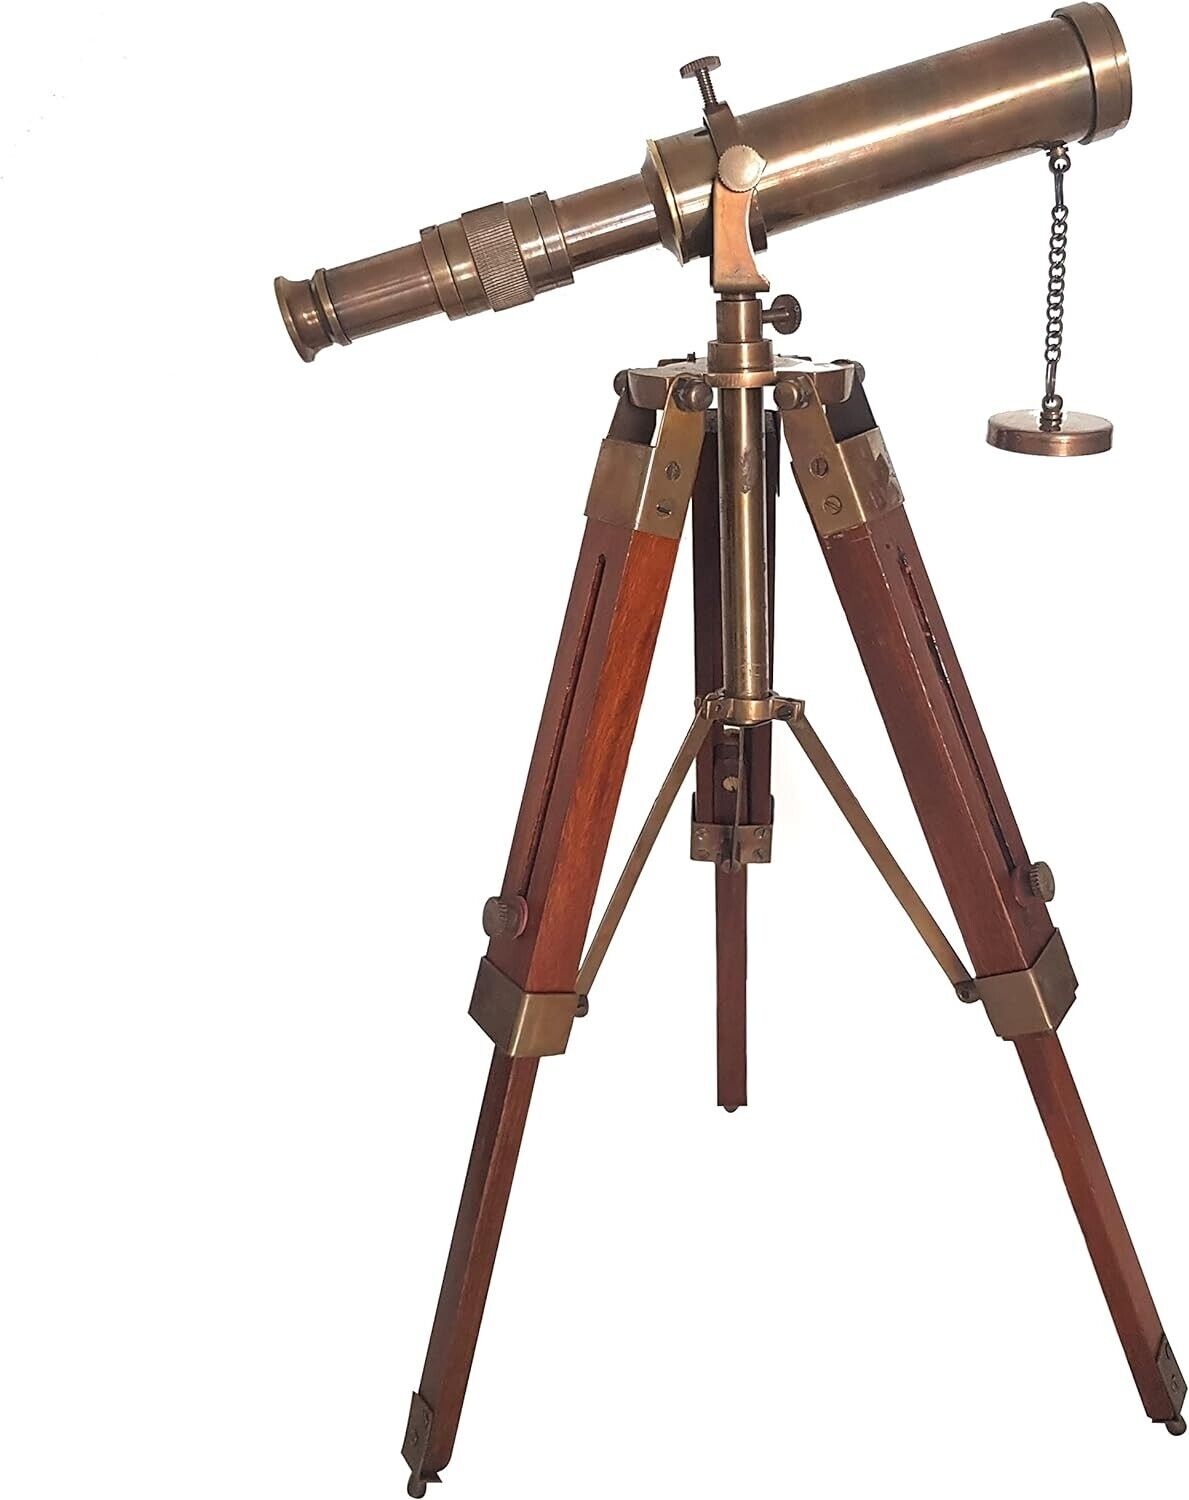 Brass Telescope with Adjustable Wooden Tripod Stand Antique Vintage Nautical